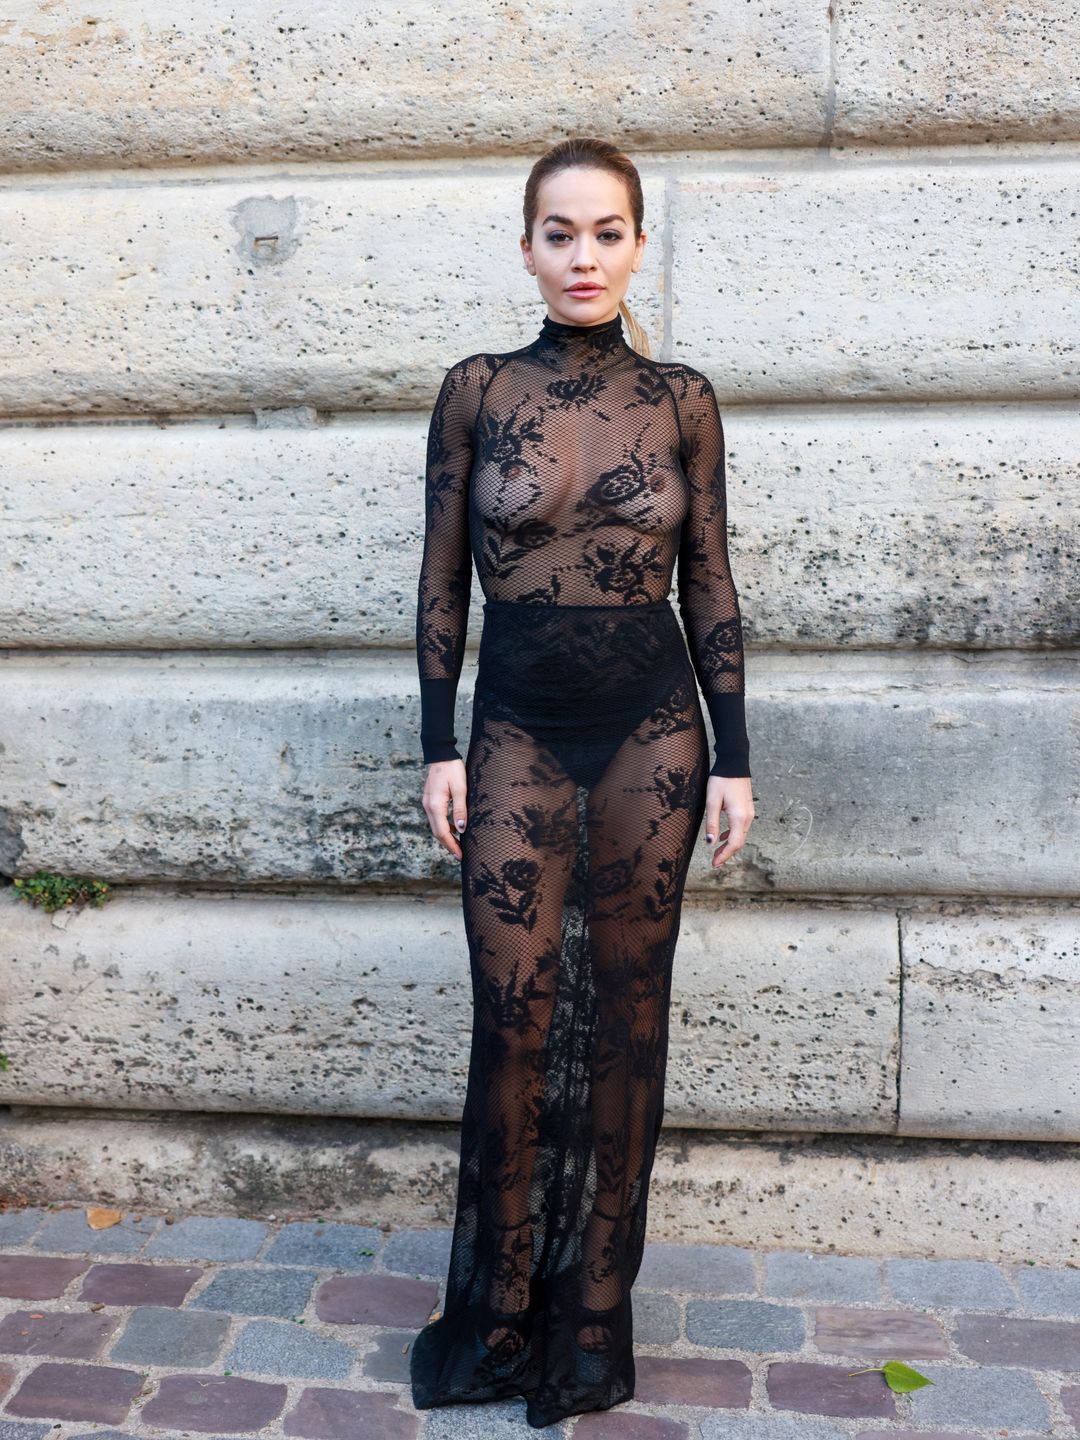 Rita Ora turned heads at the Azzedine Alaïa show in a sheer lace maxi gown, styled with high-waisted knickers and vertiginous platforms.